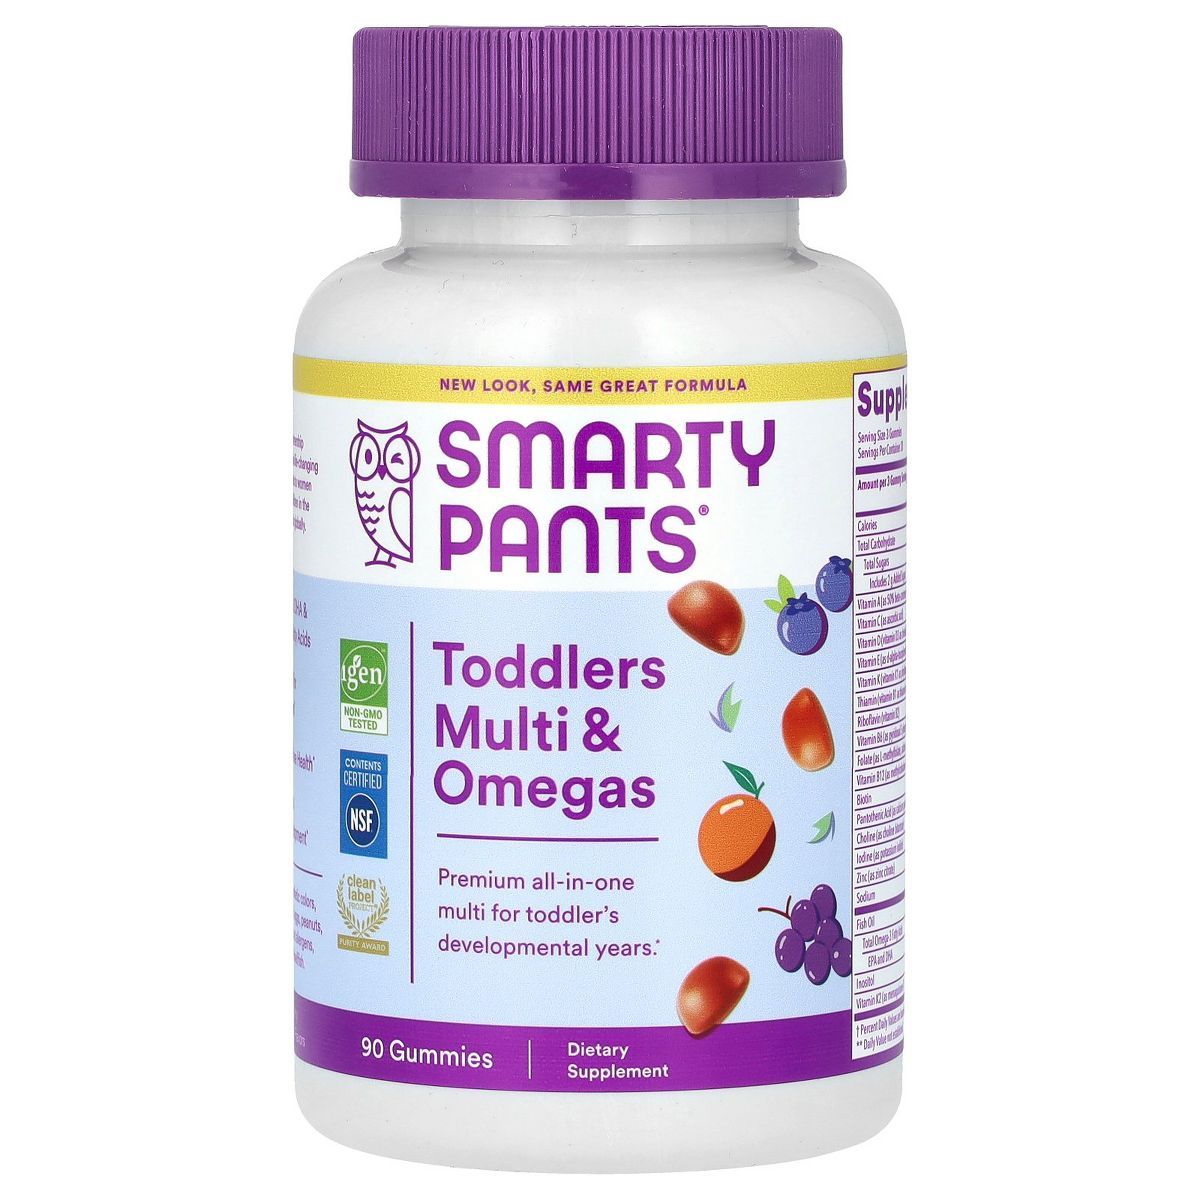 SmartyPants Toddlers, Multi & Omegas Gummies, Grape, Orange, and Blueberry, 90 Gummies | Target